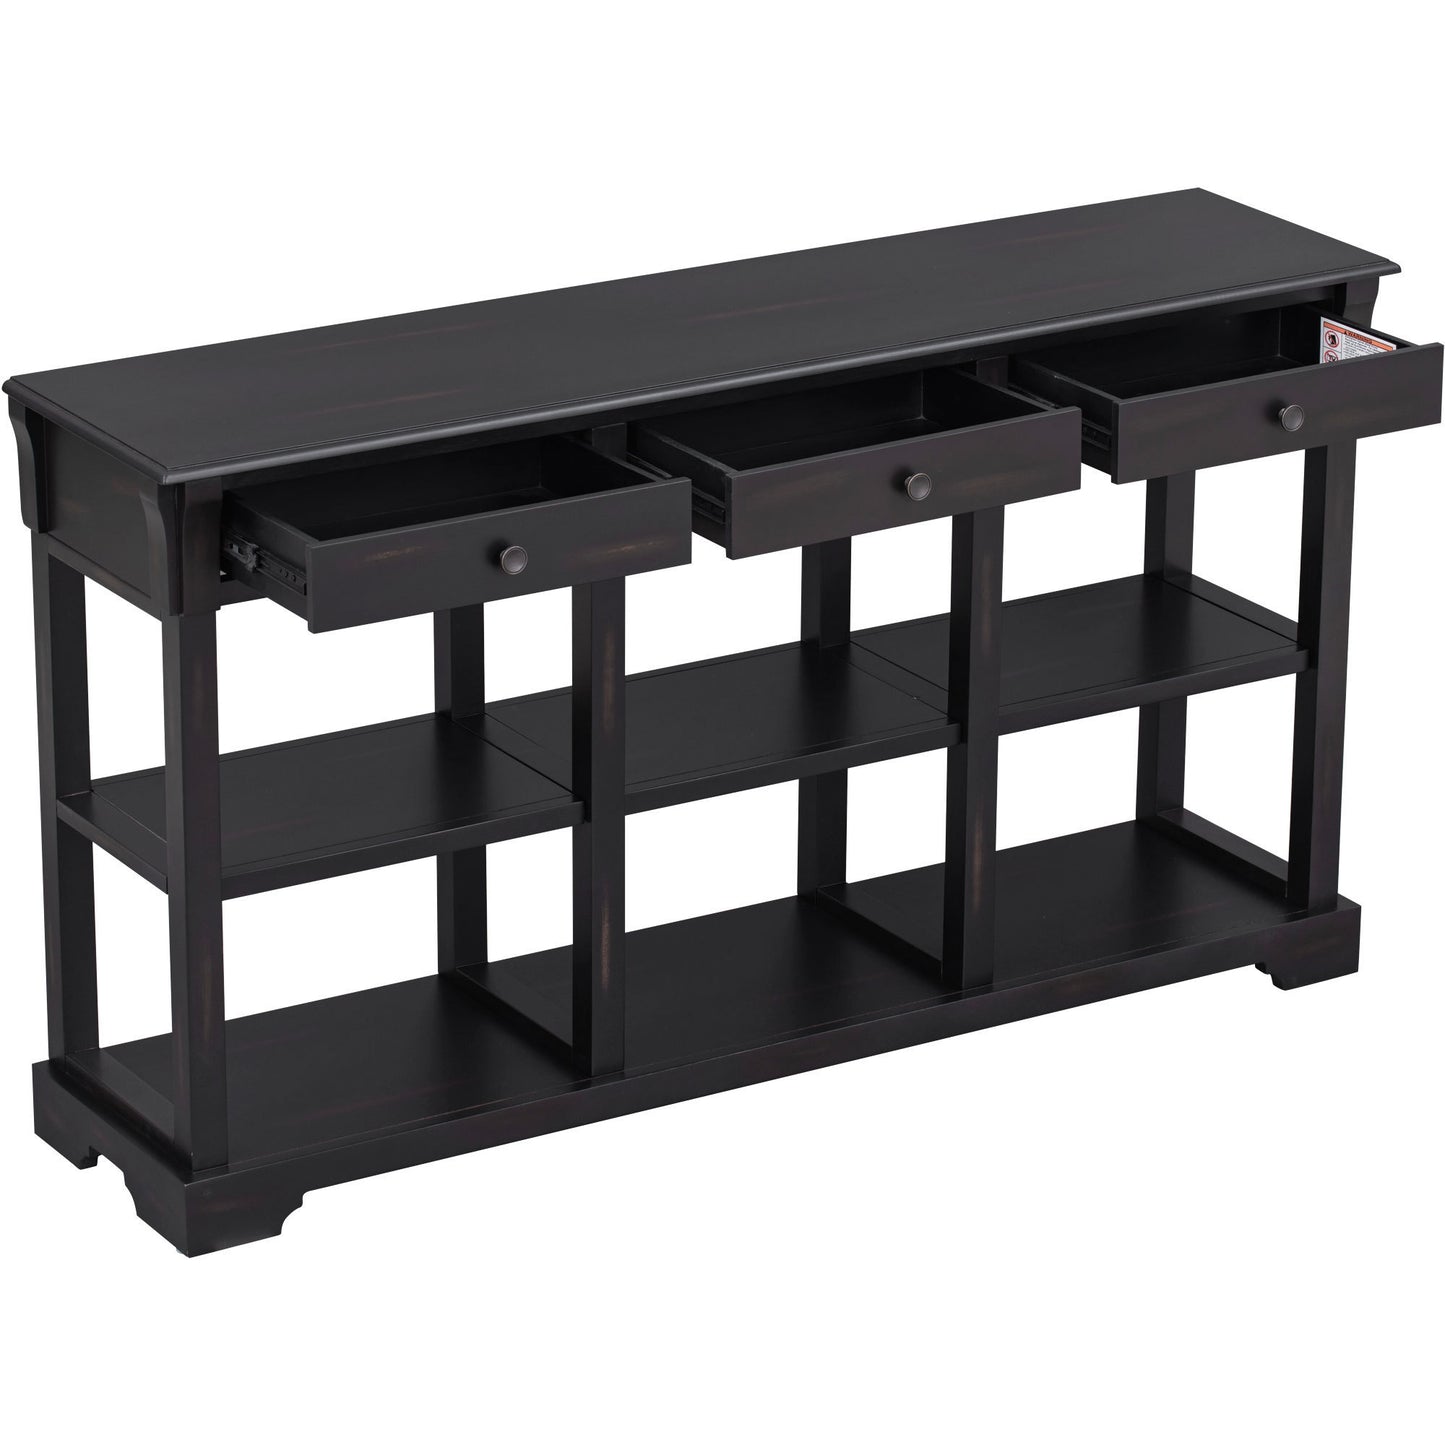 Transitional Console Table with 3 Drawers & Open Shelves - Espresso